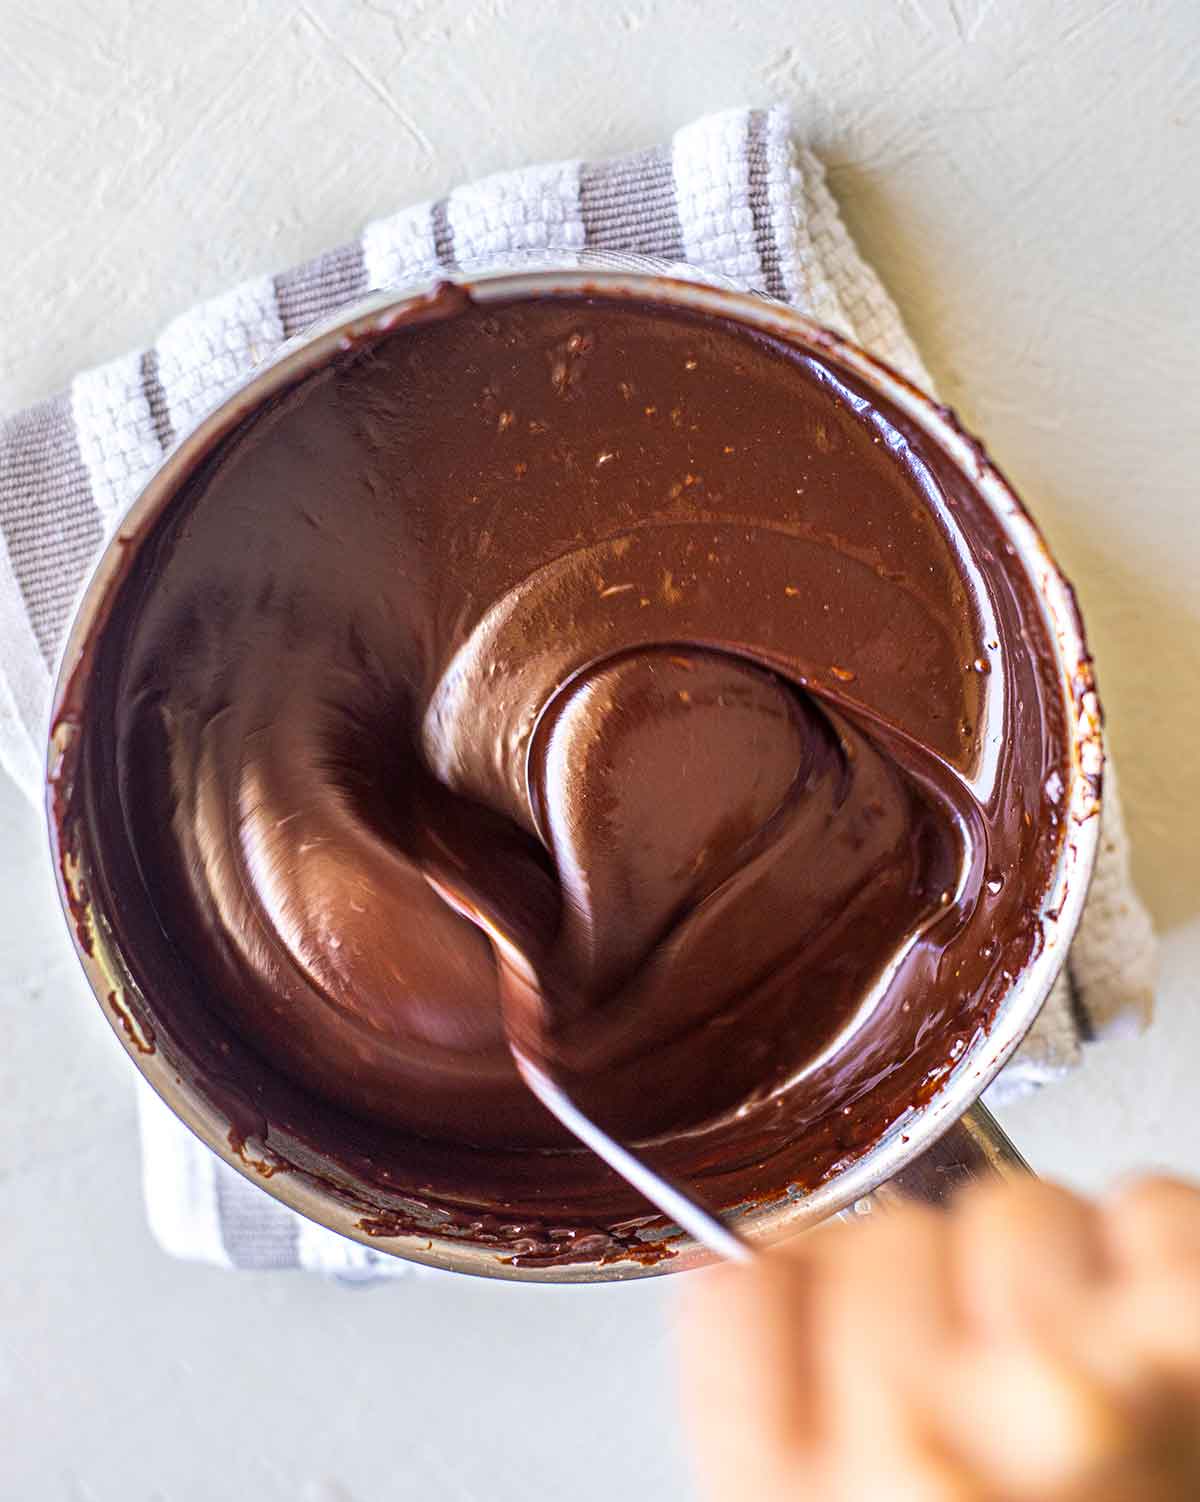 Close up of small saucepan with melted chocolate ganache. A hand is stirring a spoon in the ganache showing its thick consistency.